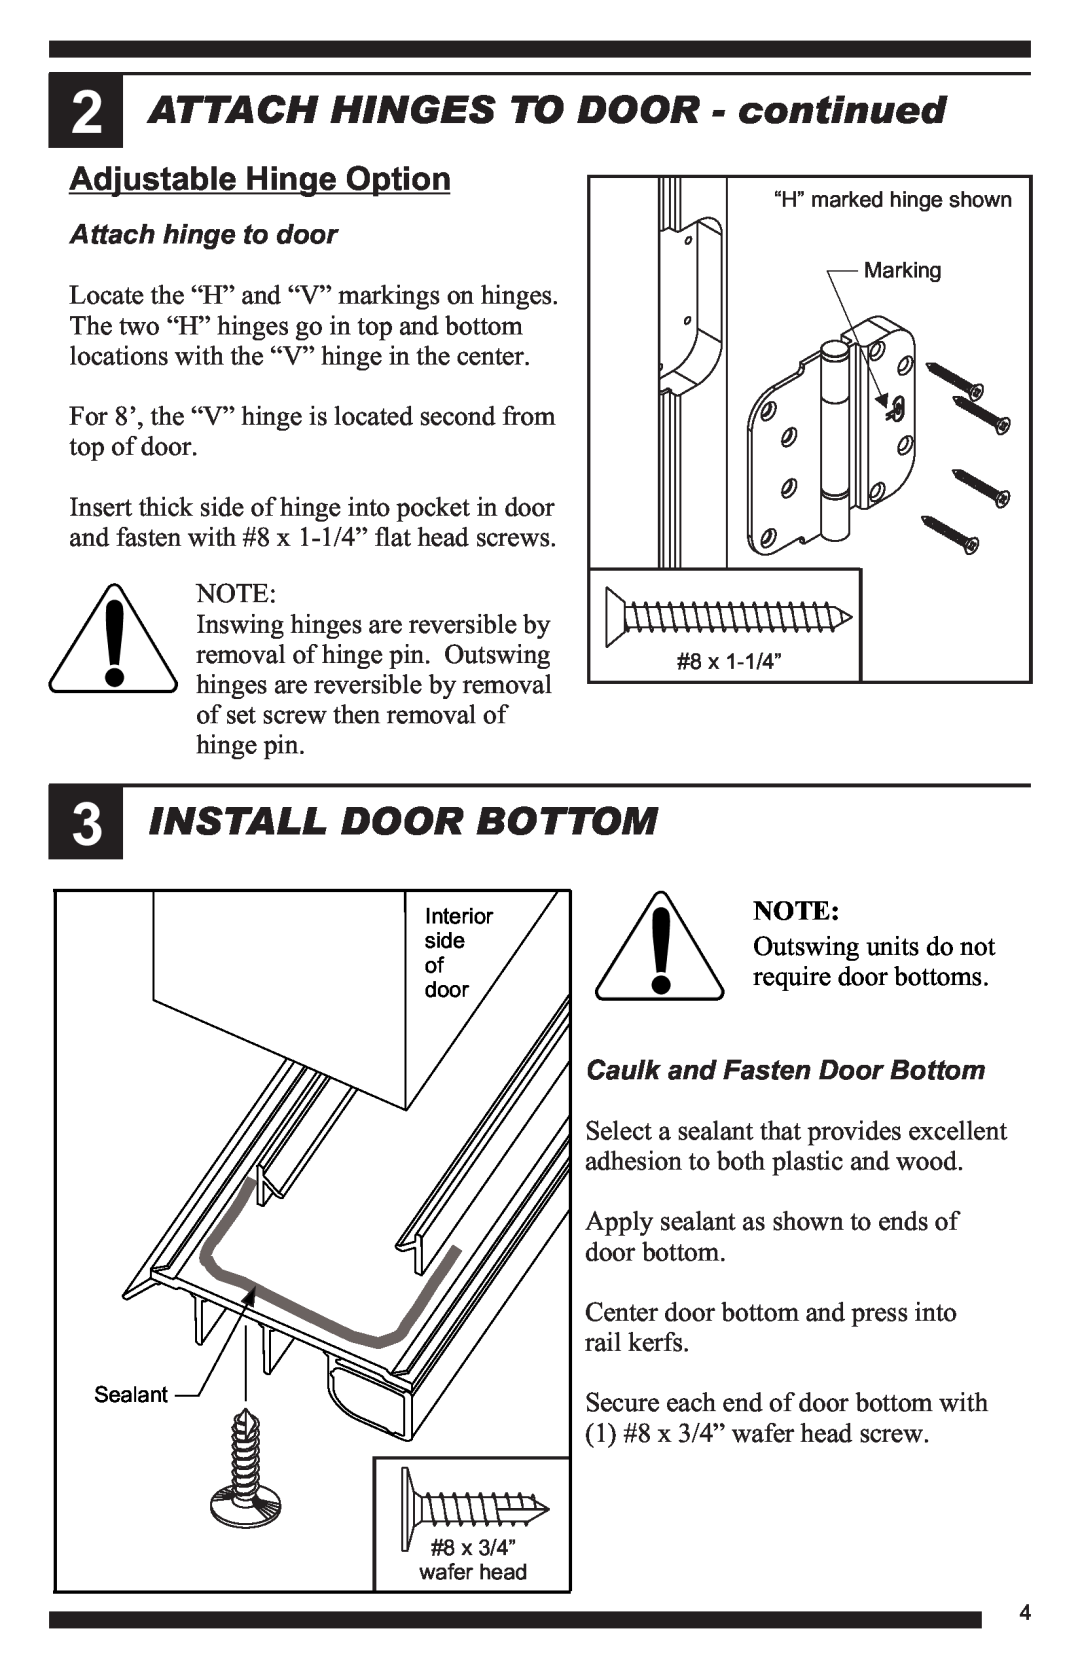 Therma-Tru Hinged Patio Door System Single Panel Assembly Unit ATTACH HINGES TO DOOR - continued, Install Door Bottom 